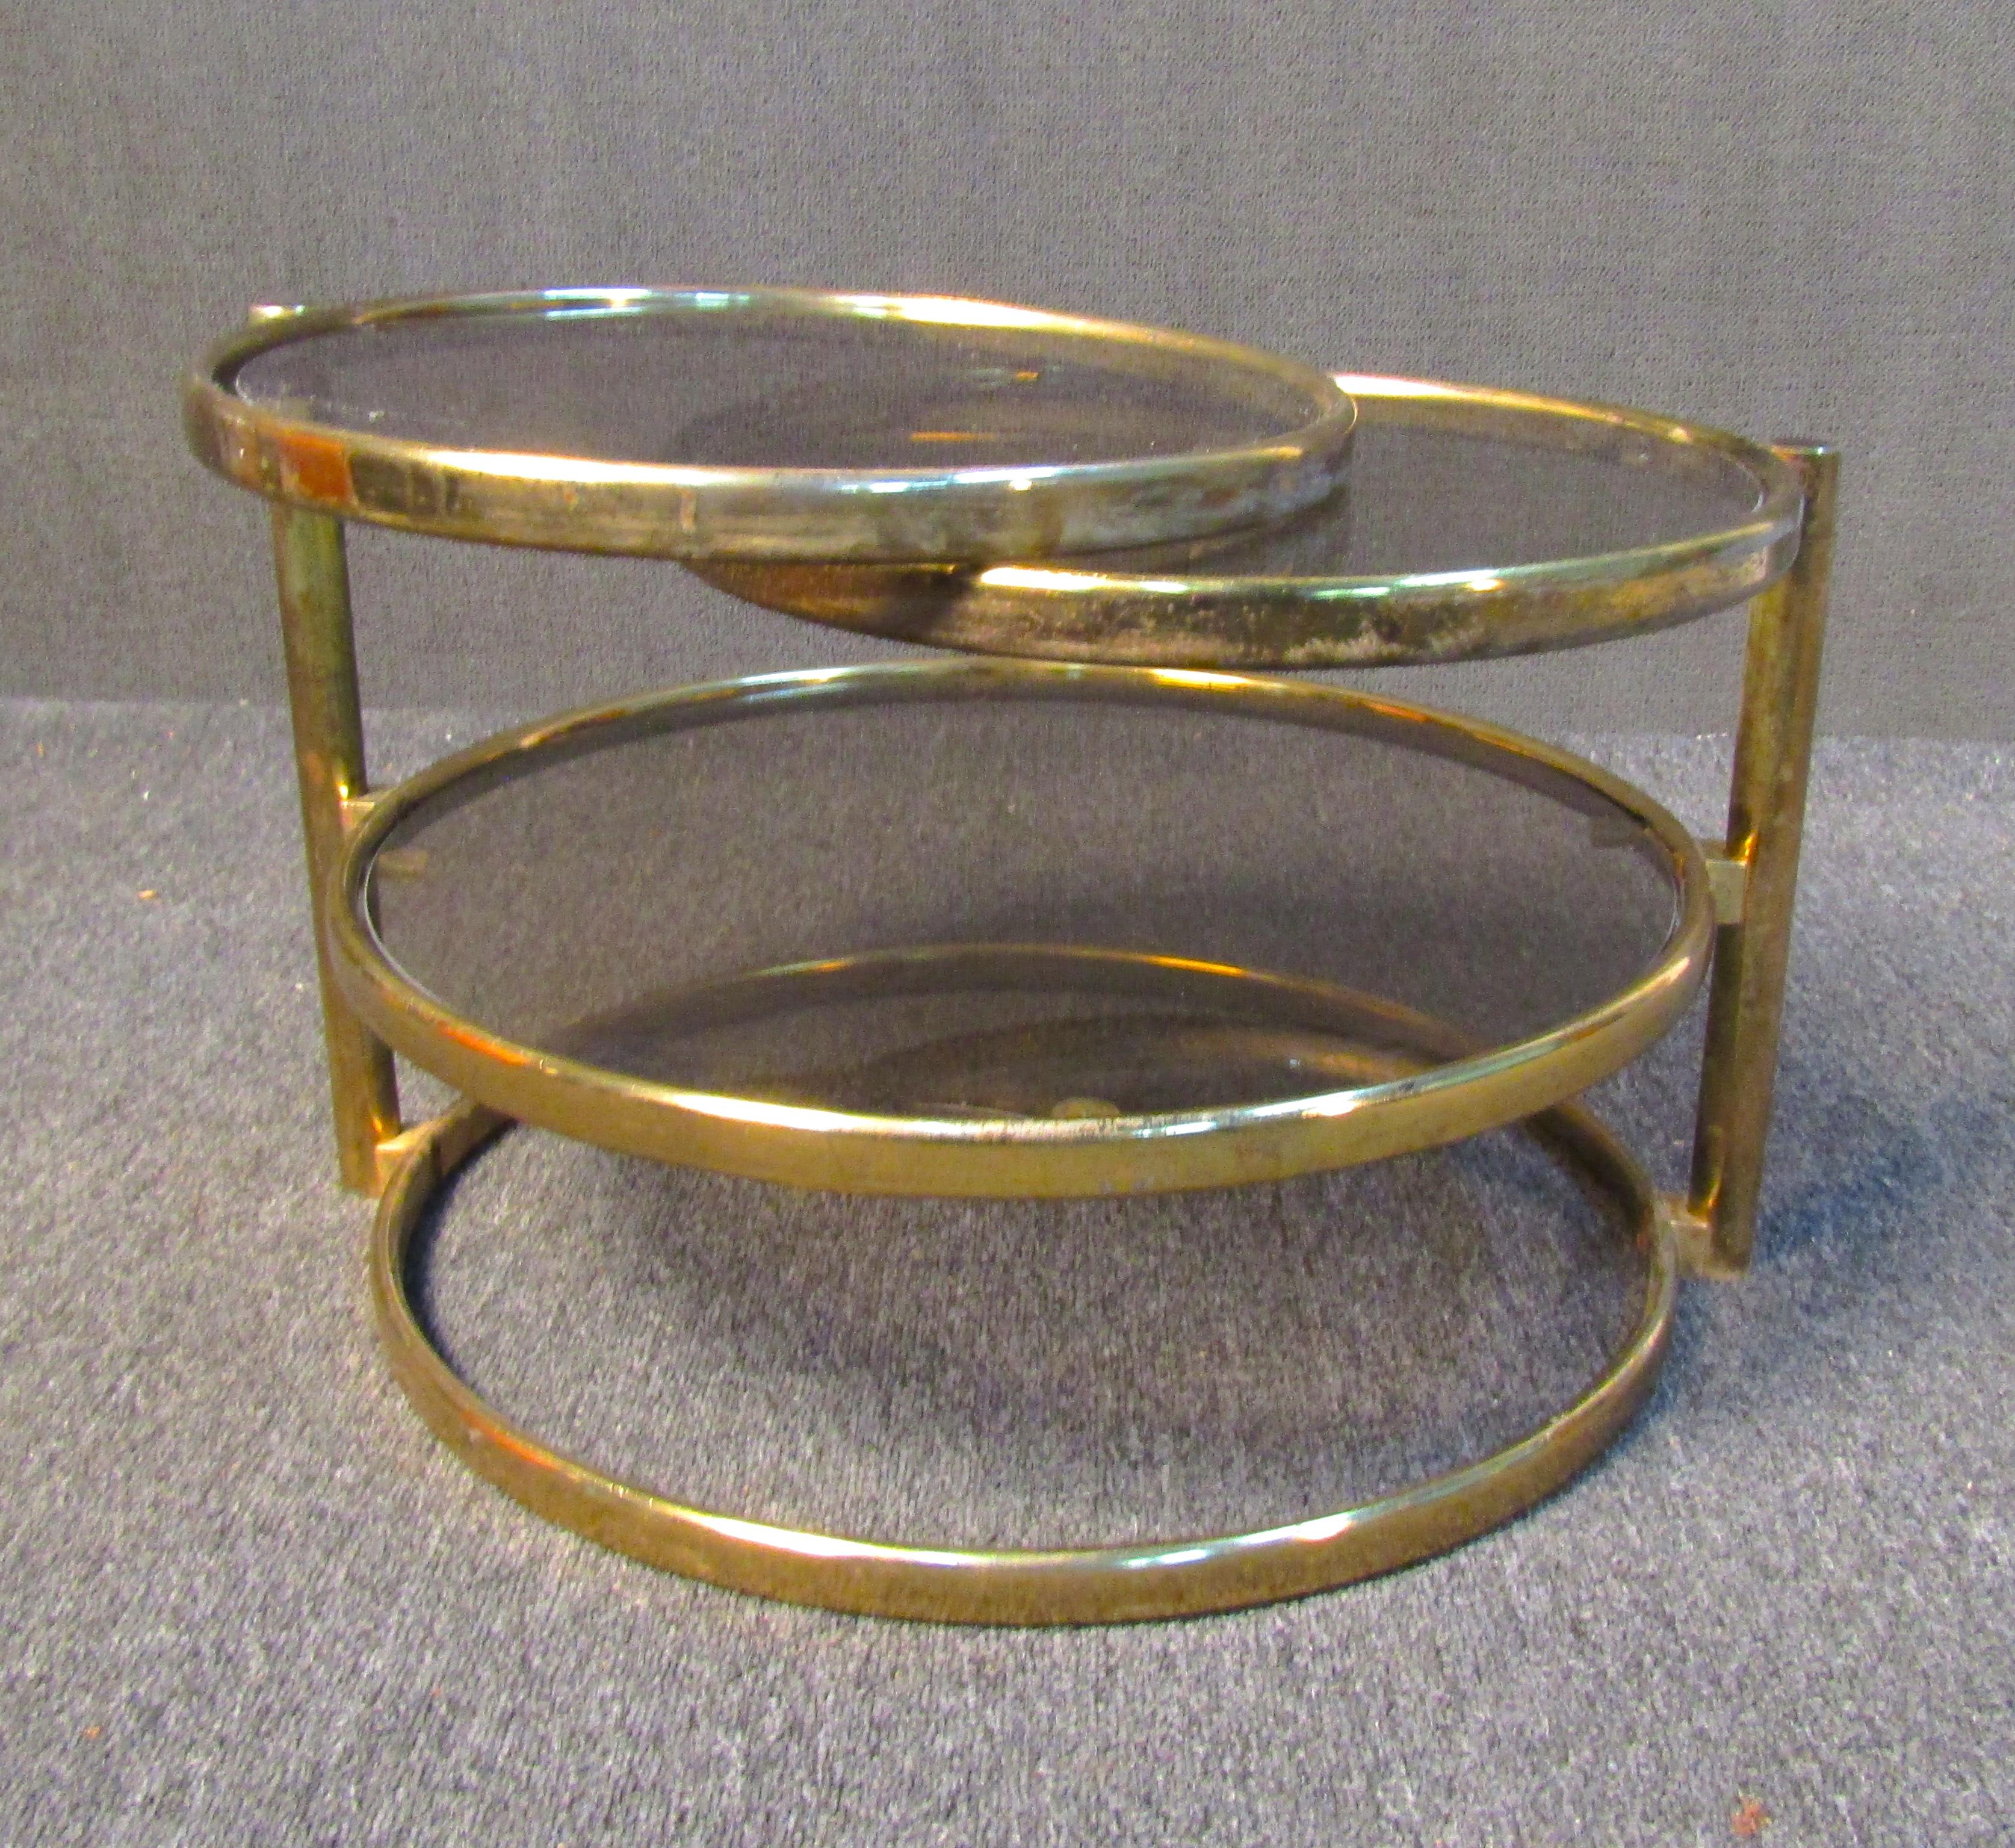 Unique vintage modern side table. The table is comprised of three elegant tiers of glass and brass hoops. The top two tiers can swivel out to expand the table for a variety of uses. This table would make an excellent coffee table, side table, or end